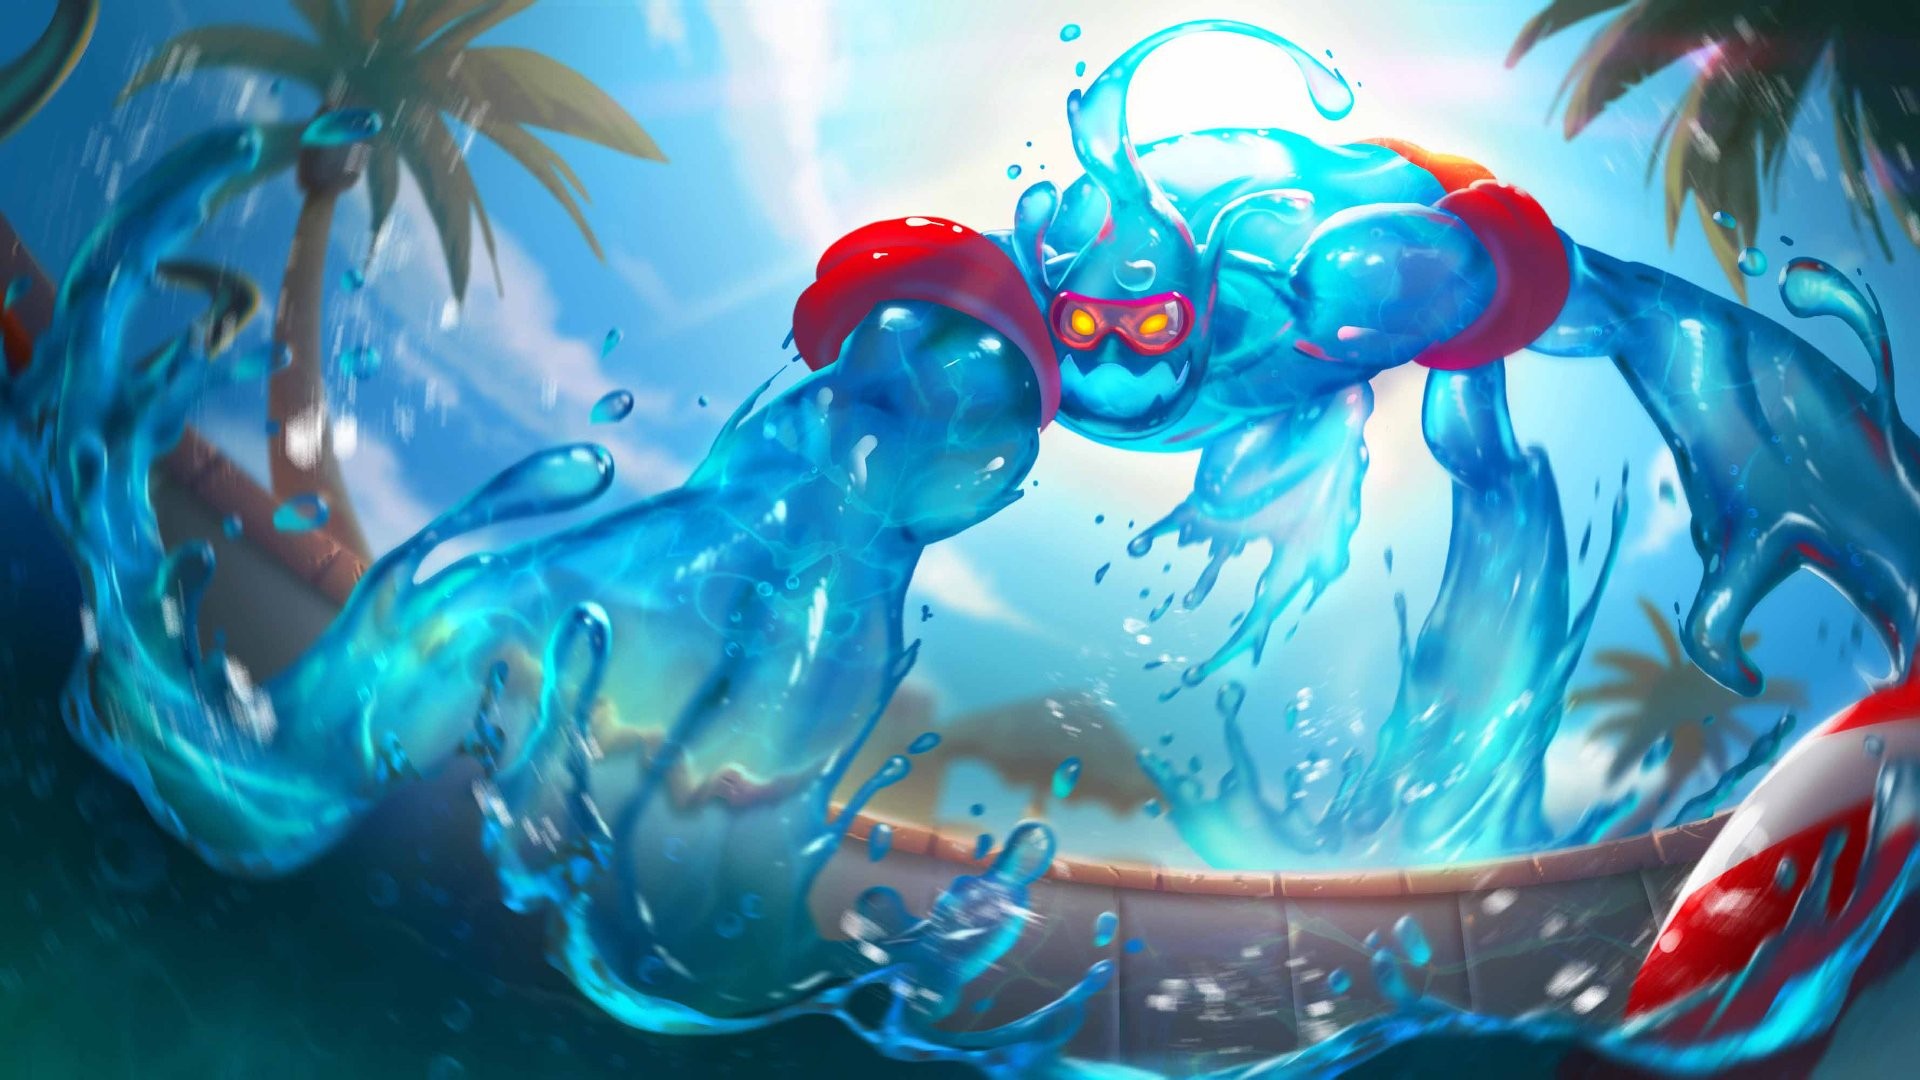 General 1920x1080 League of Legends video game characters Zac cyan artwork